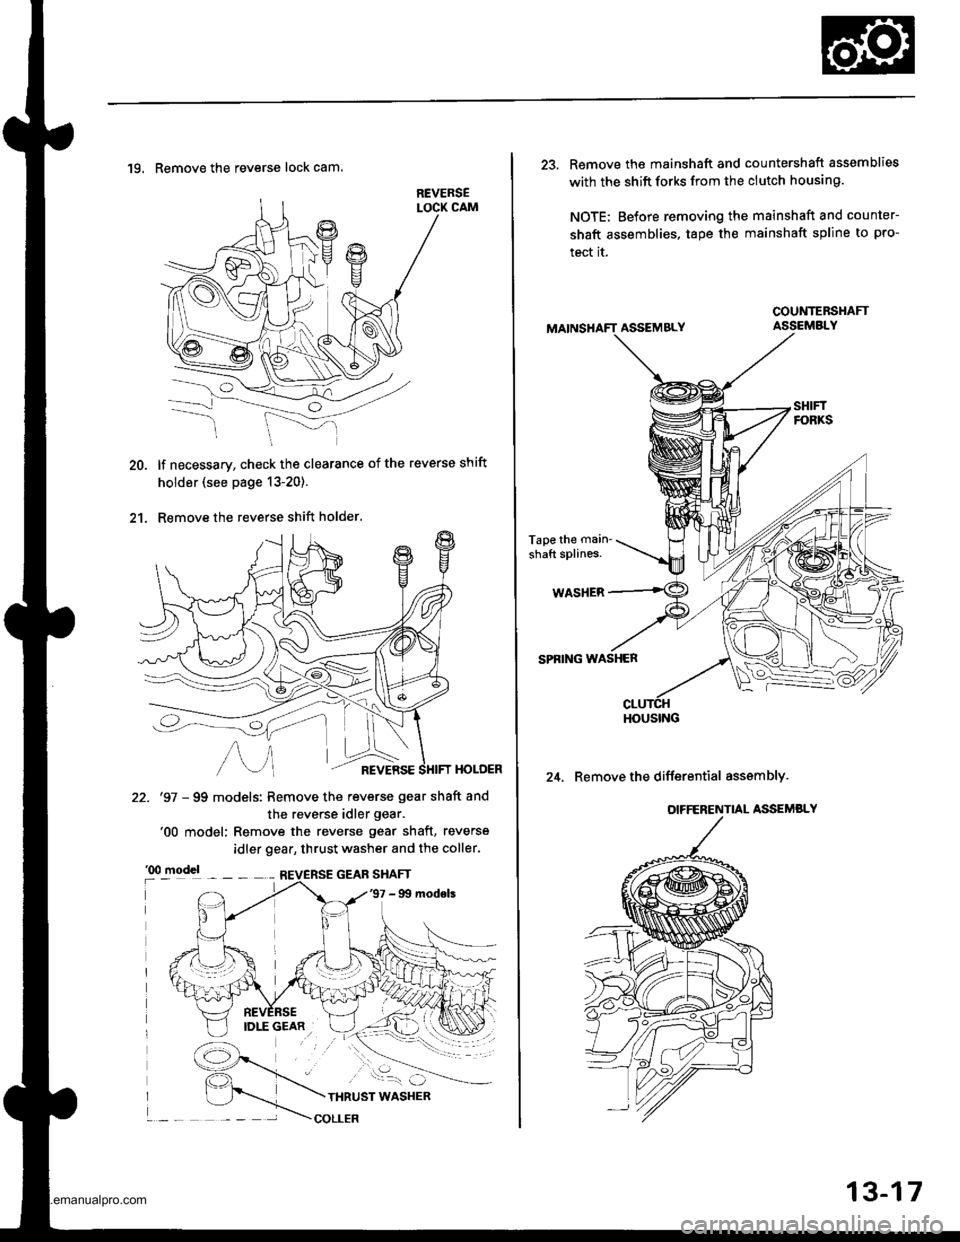 HONDA CR-V 1999 RD1-RD3 / 1.G Workshop Manual 
20.
2t.
19. Remove the reverse lock cam.
lf necessary, check the clearance of the reverse shift
holder (see page 13-20).
Remove the reverse shift holder.
HOLOER
22. 97 - 99 models: Remove the rever